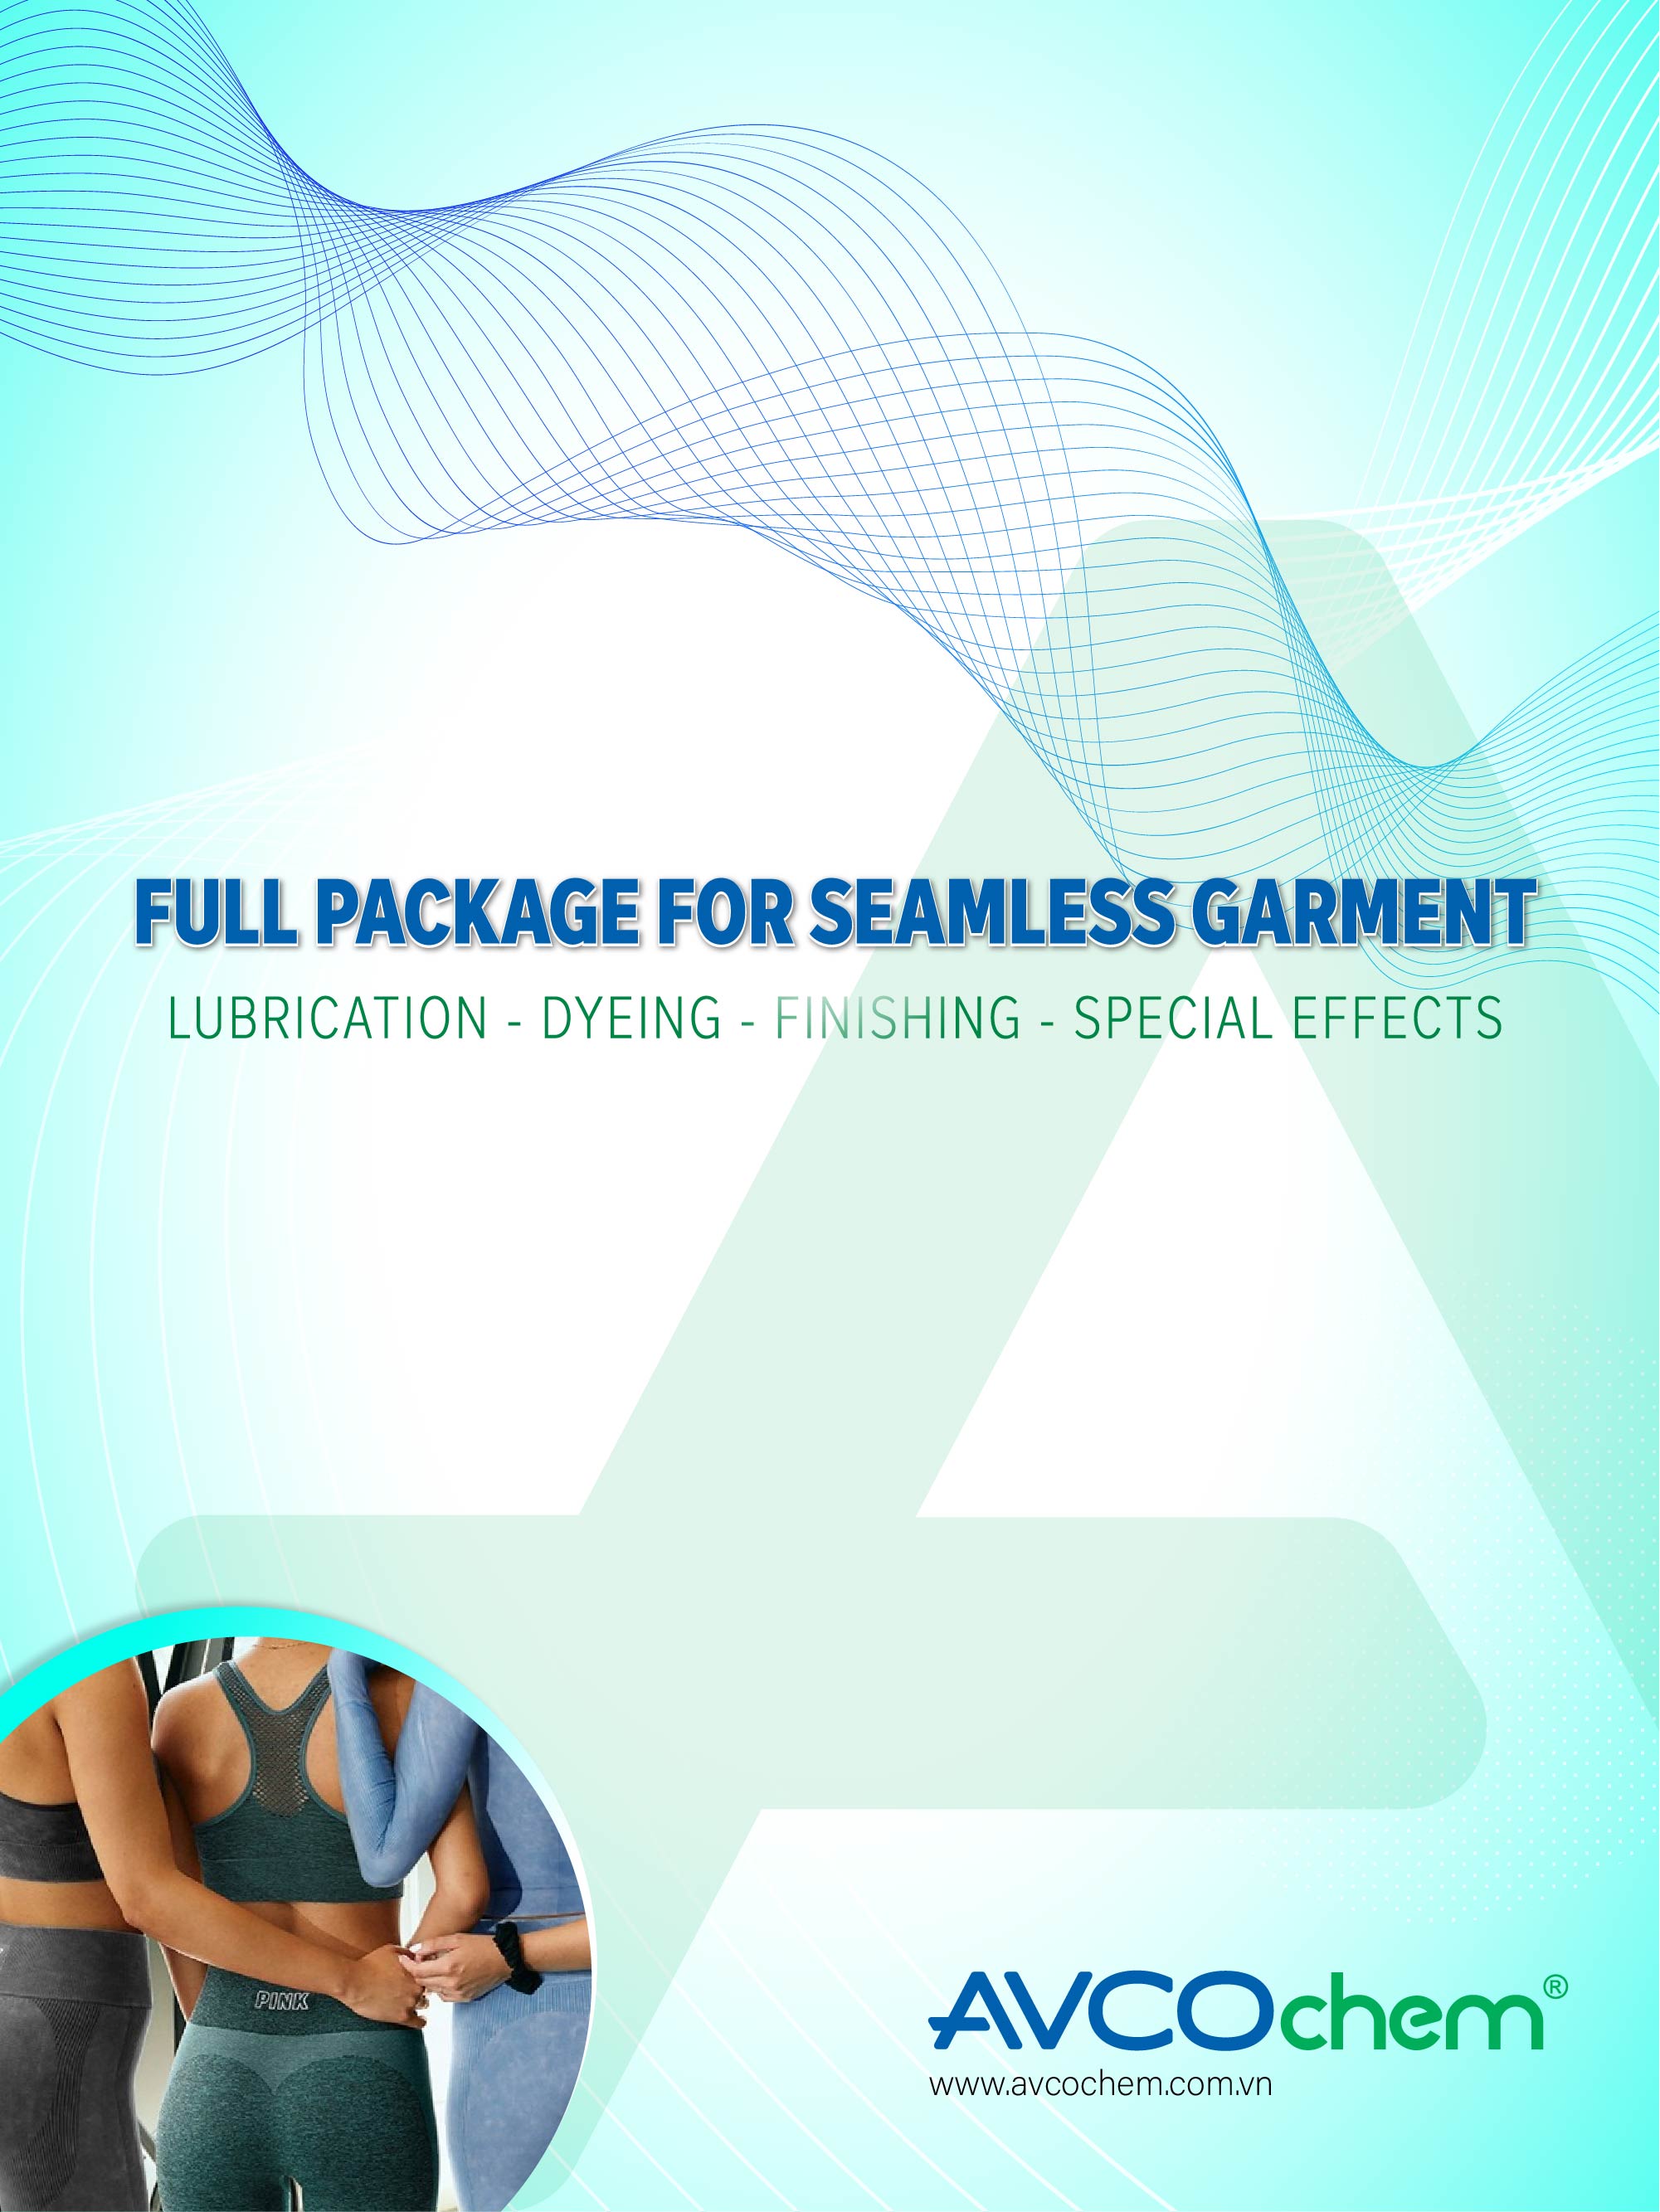 PACKAGE FOR SEAMLESS GARMENT